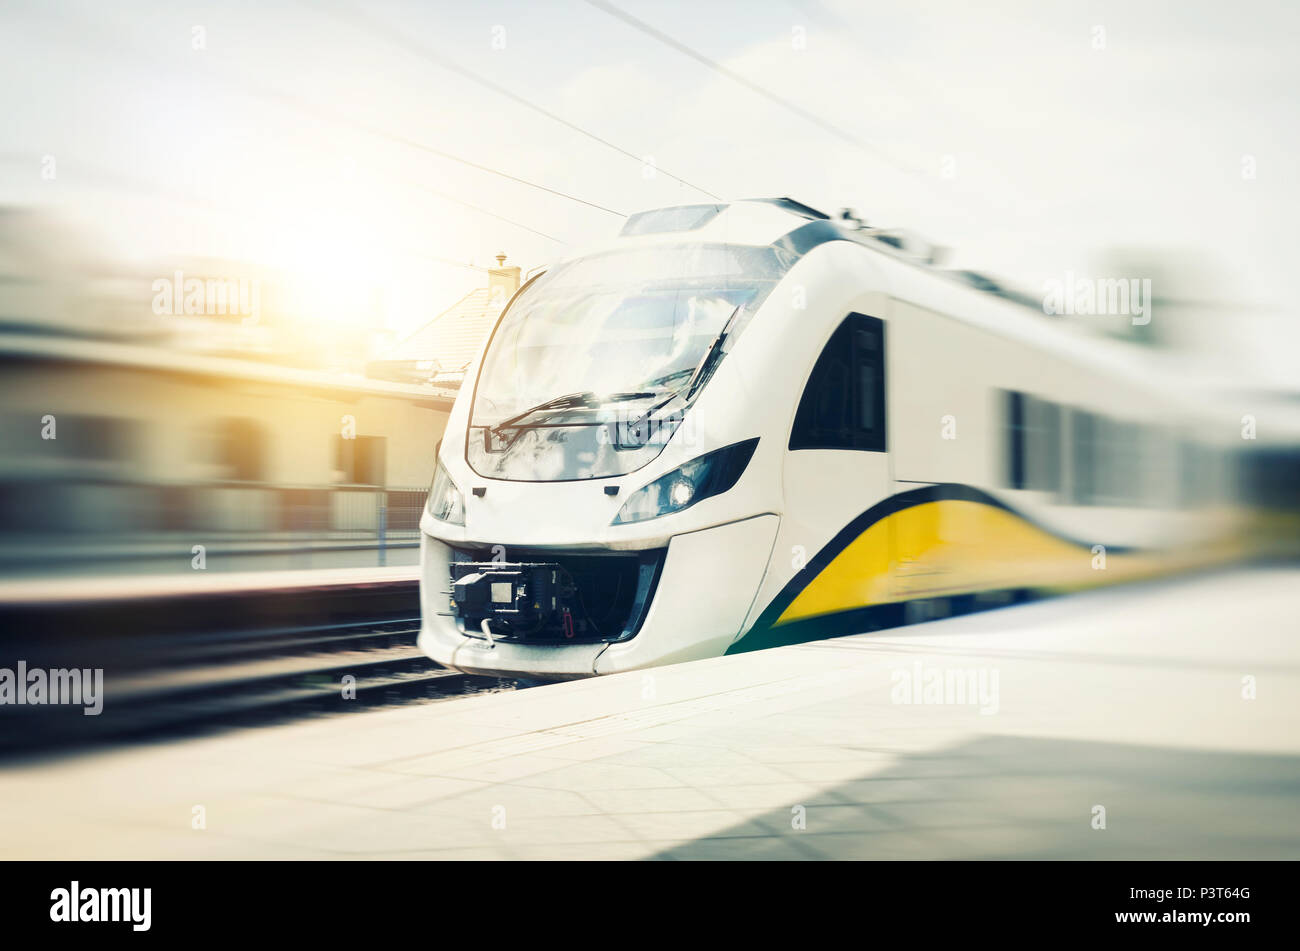 High speed train in motion at the railway station. Landscape with passenger train on railroad Stock Photo